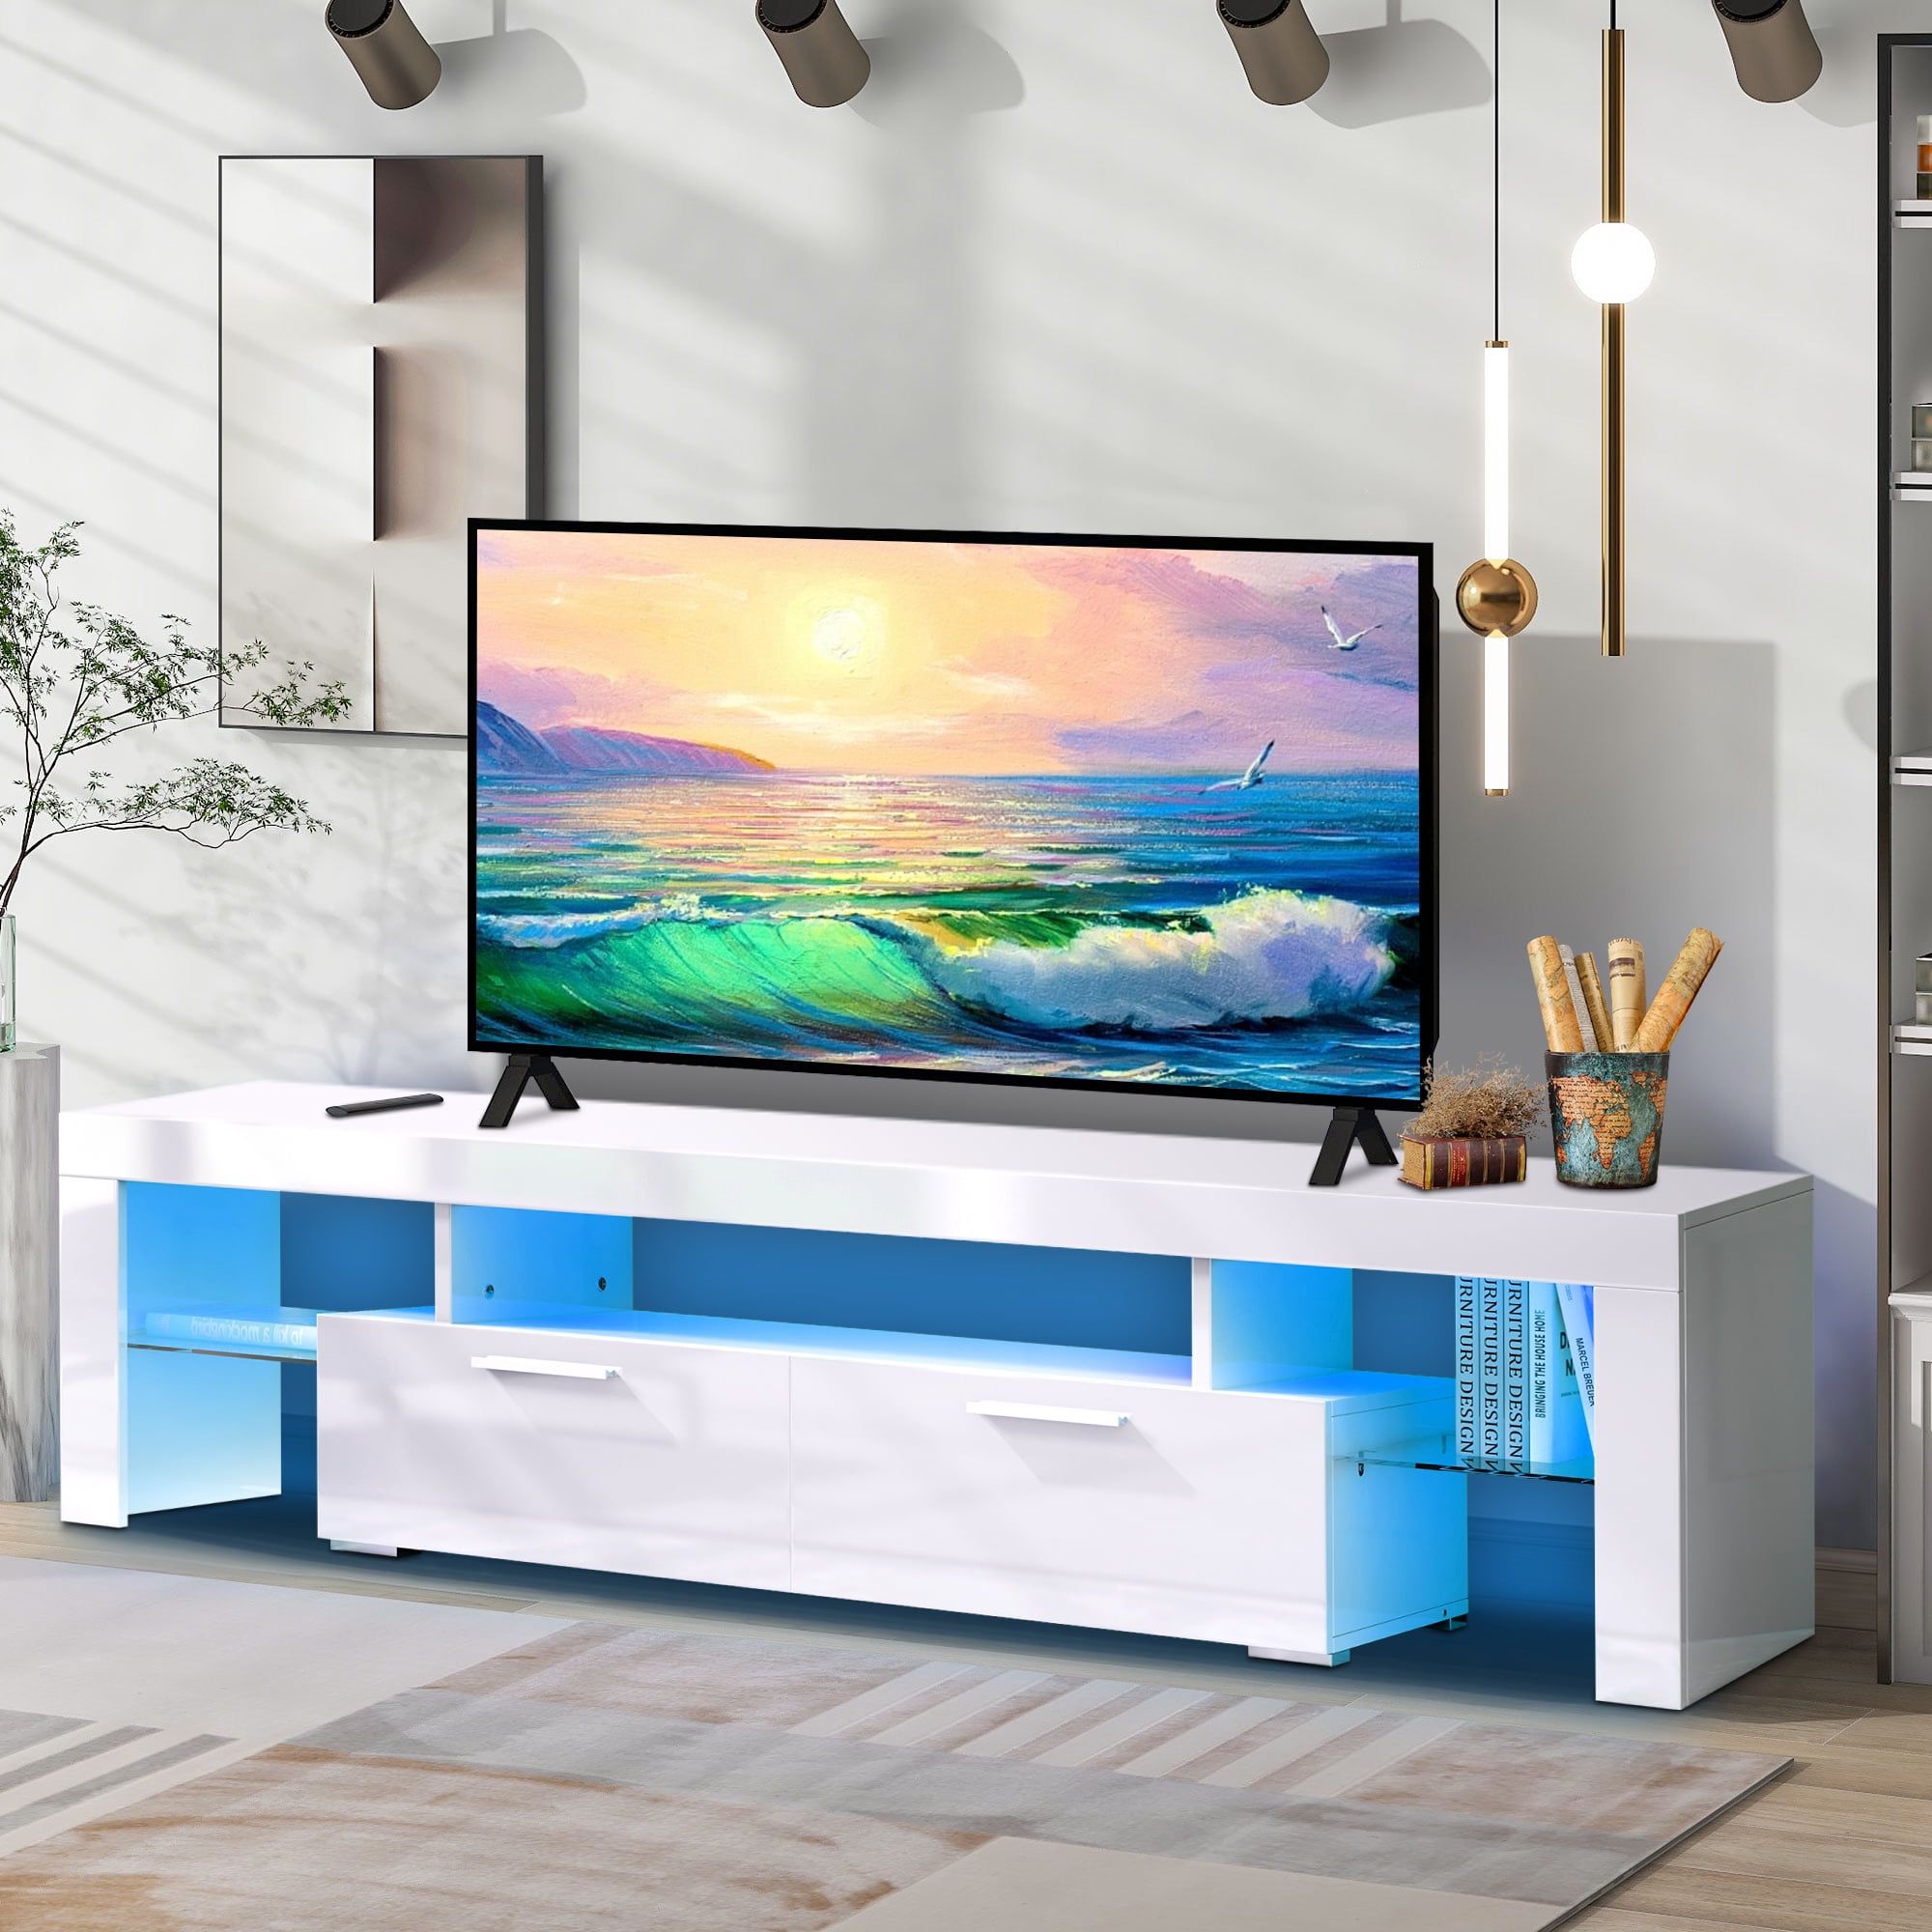 Uhomepro Tv Stand For Tvs Up To 70, Living Room Uk | Ubuy With Regard To Rgb Tv Entertainment Centers (View 17 of 20)